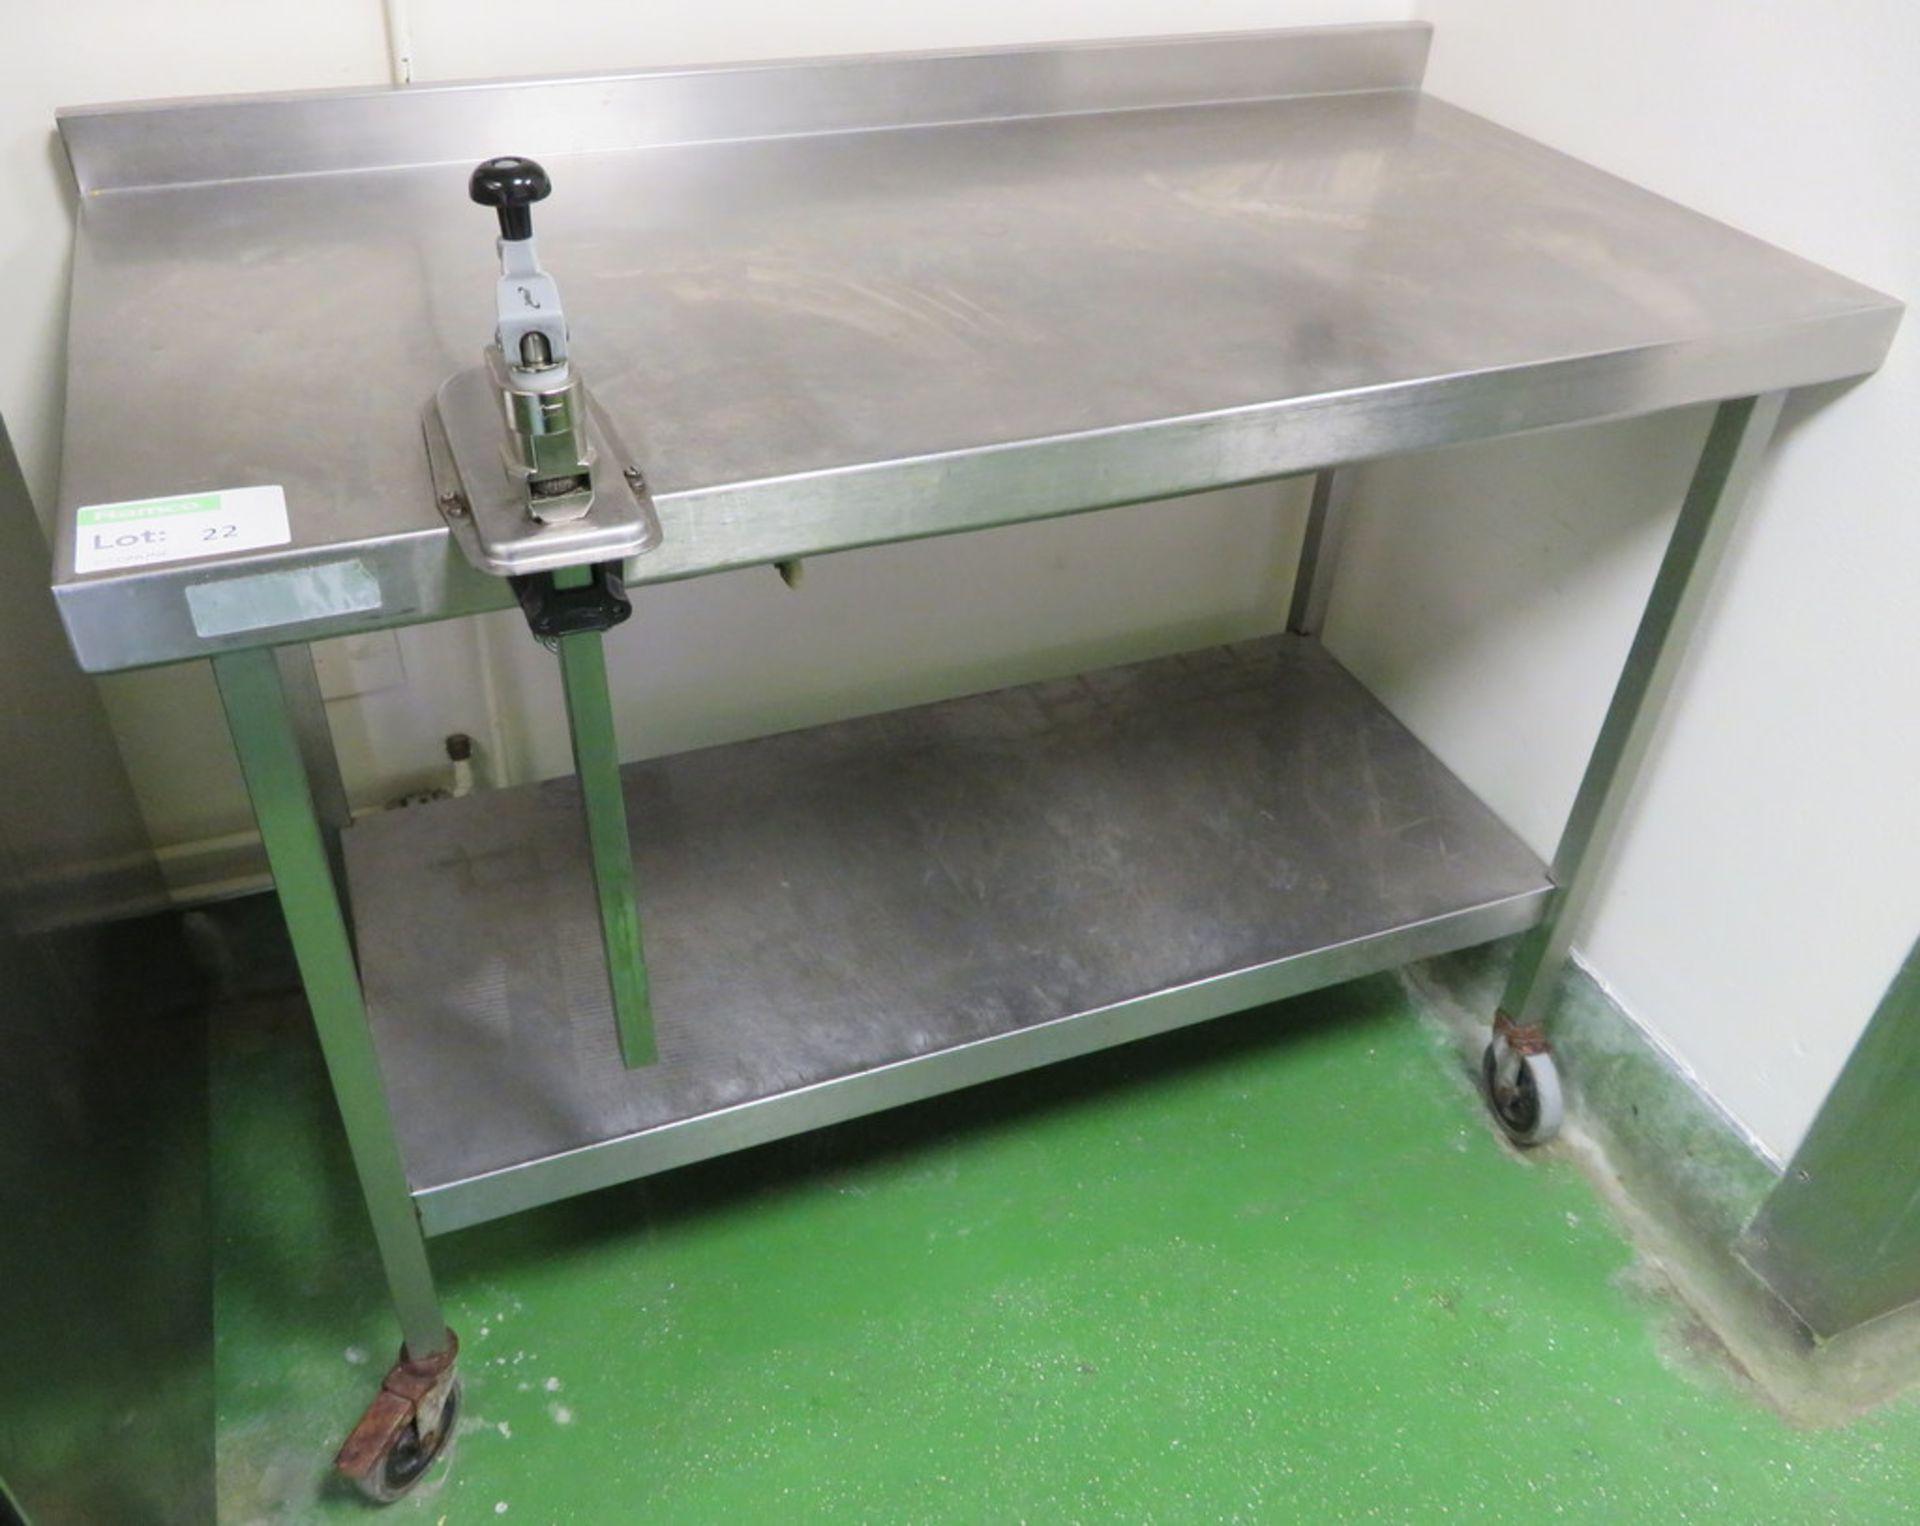 MOBILE STAINLESS STEEL PREP TABLE